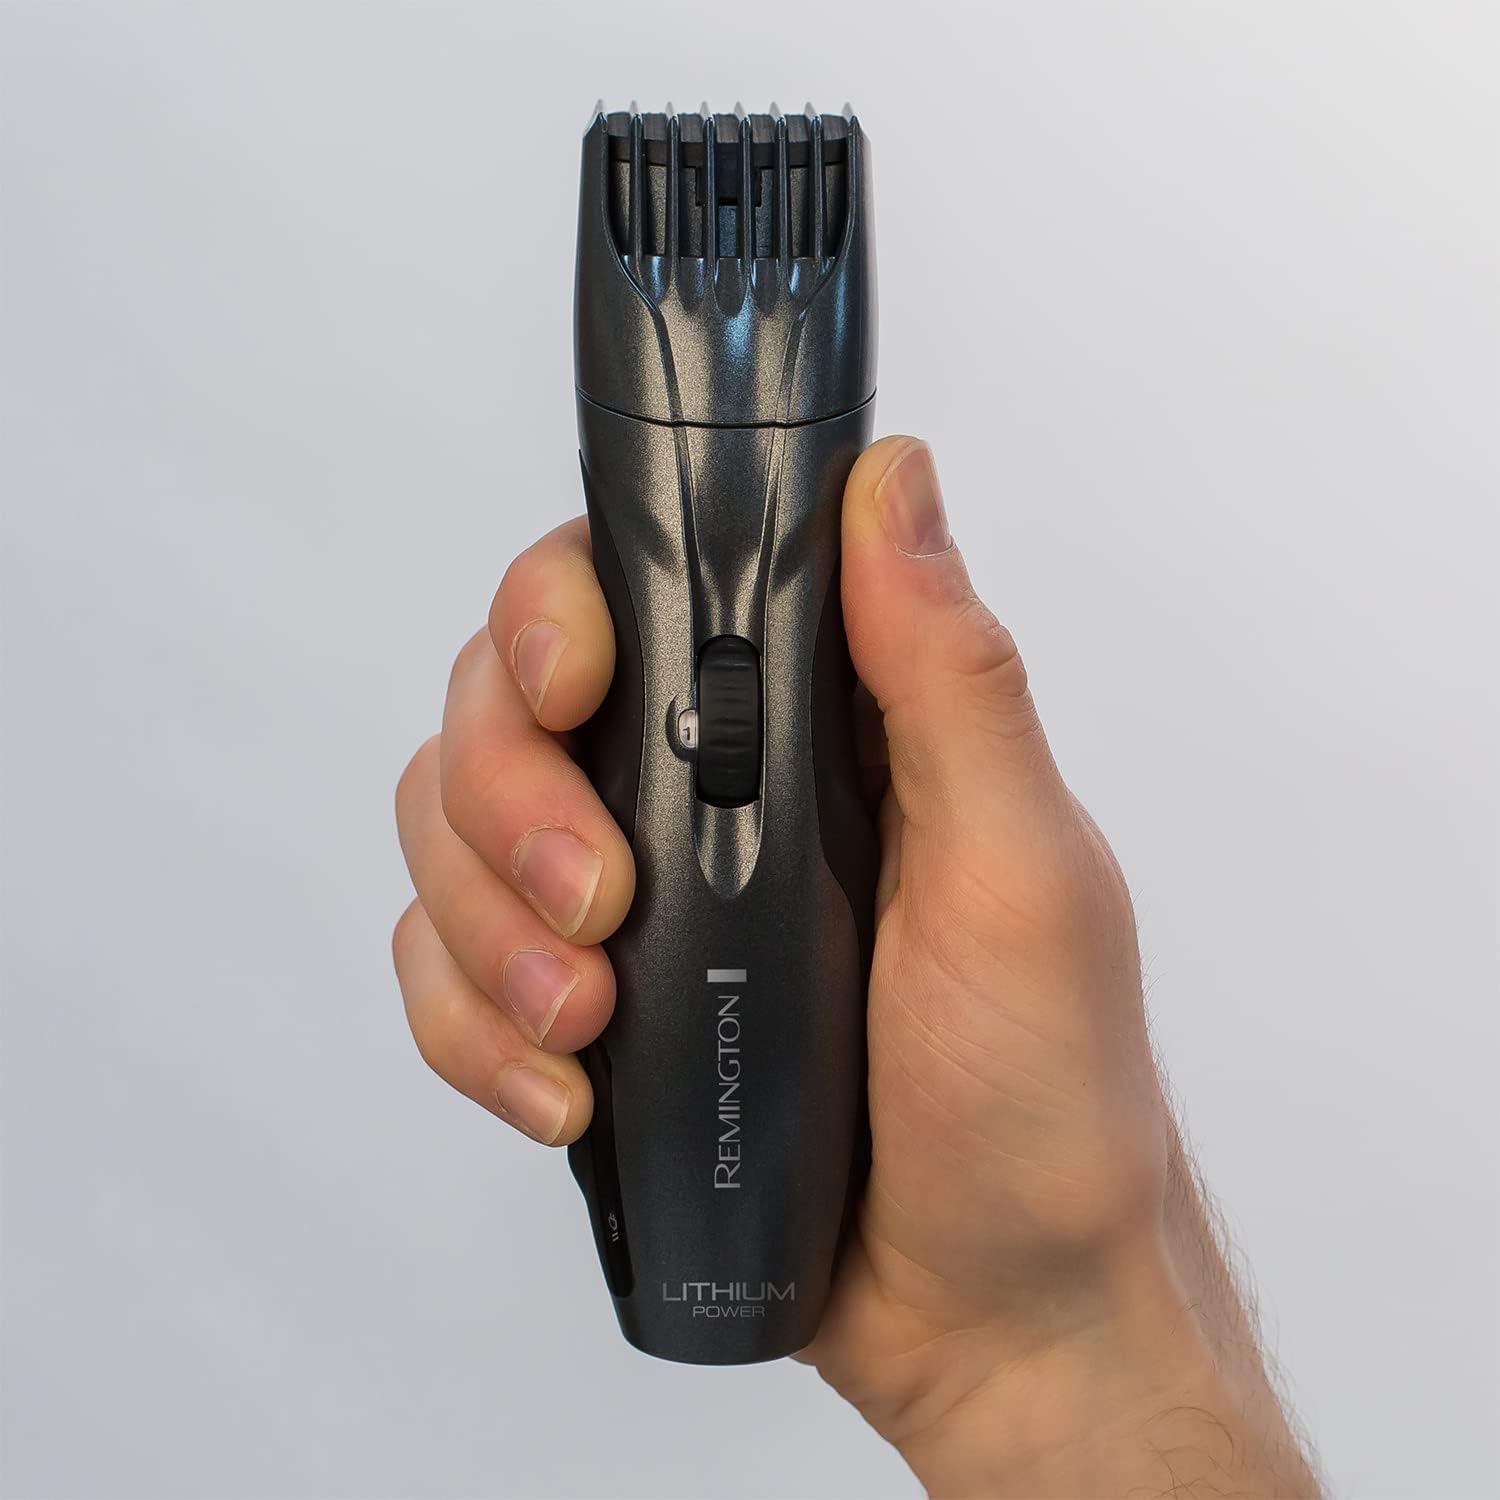 Remington Lithium Barba Beard Trimmer - Advanced Ceramic Blades, 9 Length Settings, Pop-up Trimmer, Comb Attachment, 60-Minute Runtime, Cordless - MB350L